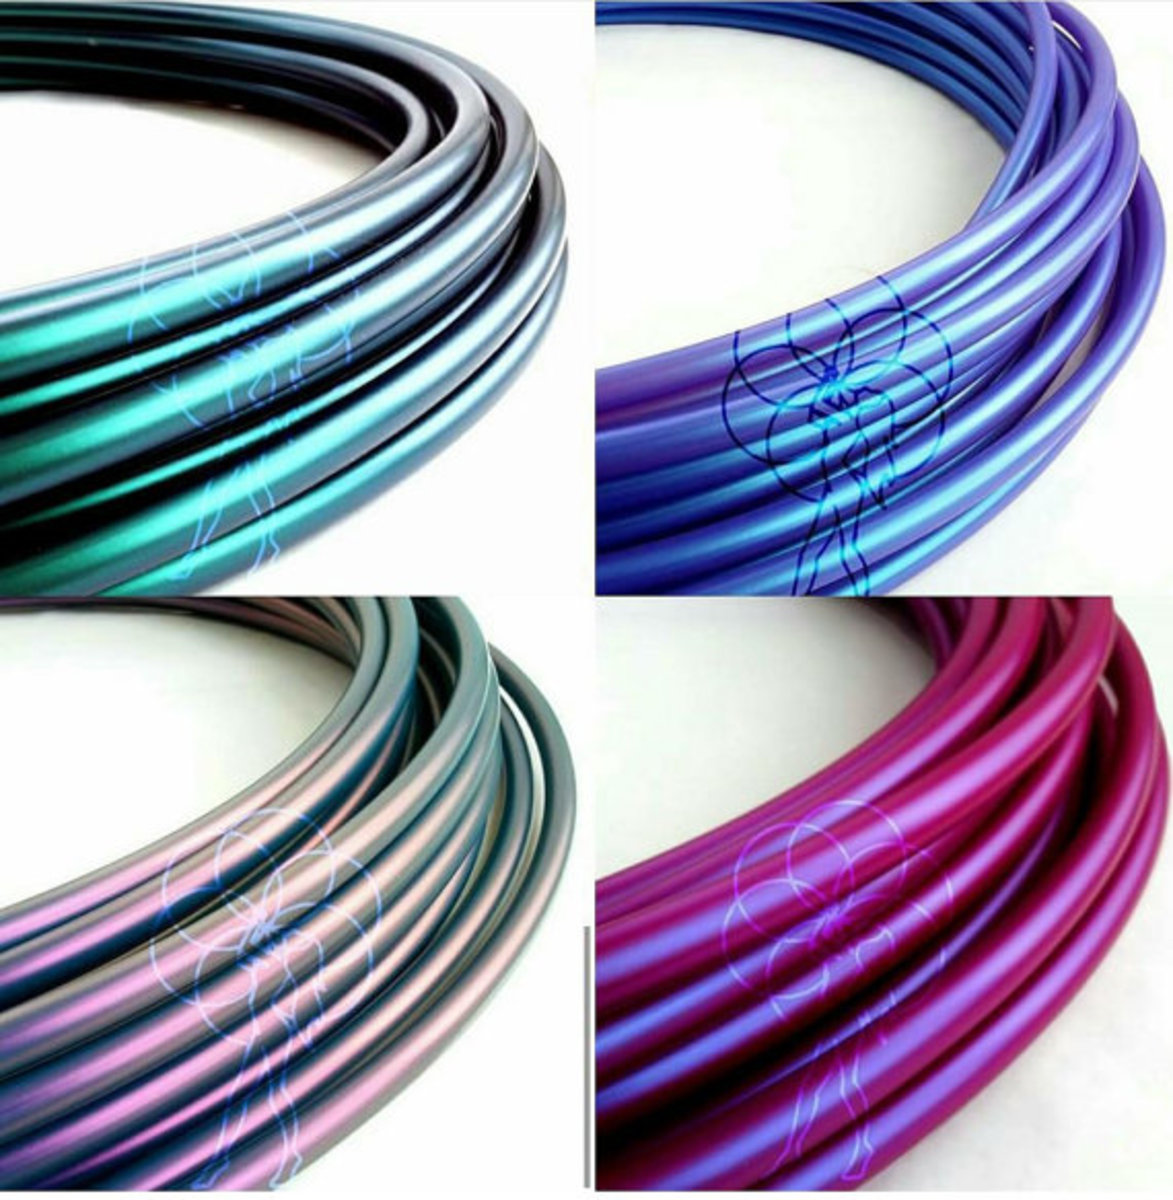 A few of the available color-shift options, "Black Mamba, Lunar Blue, Raven, Blue Plum"